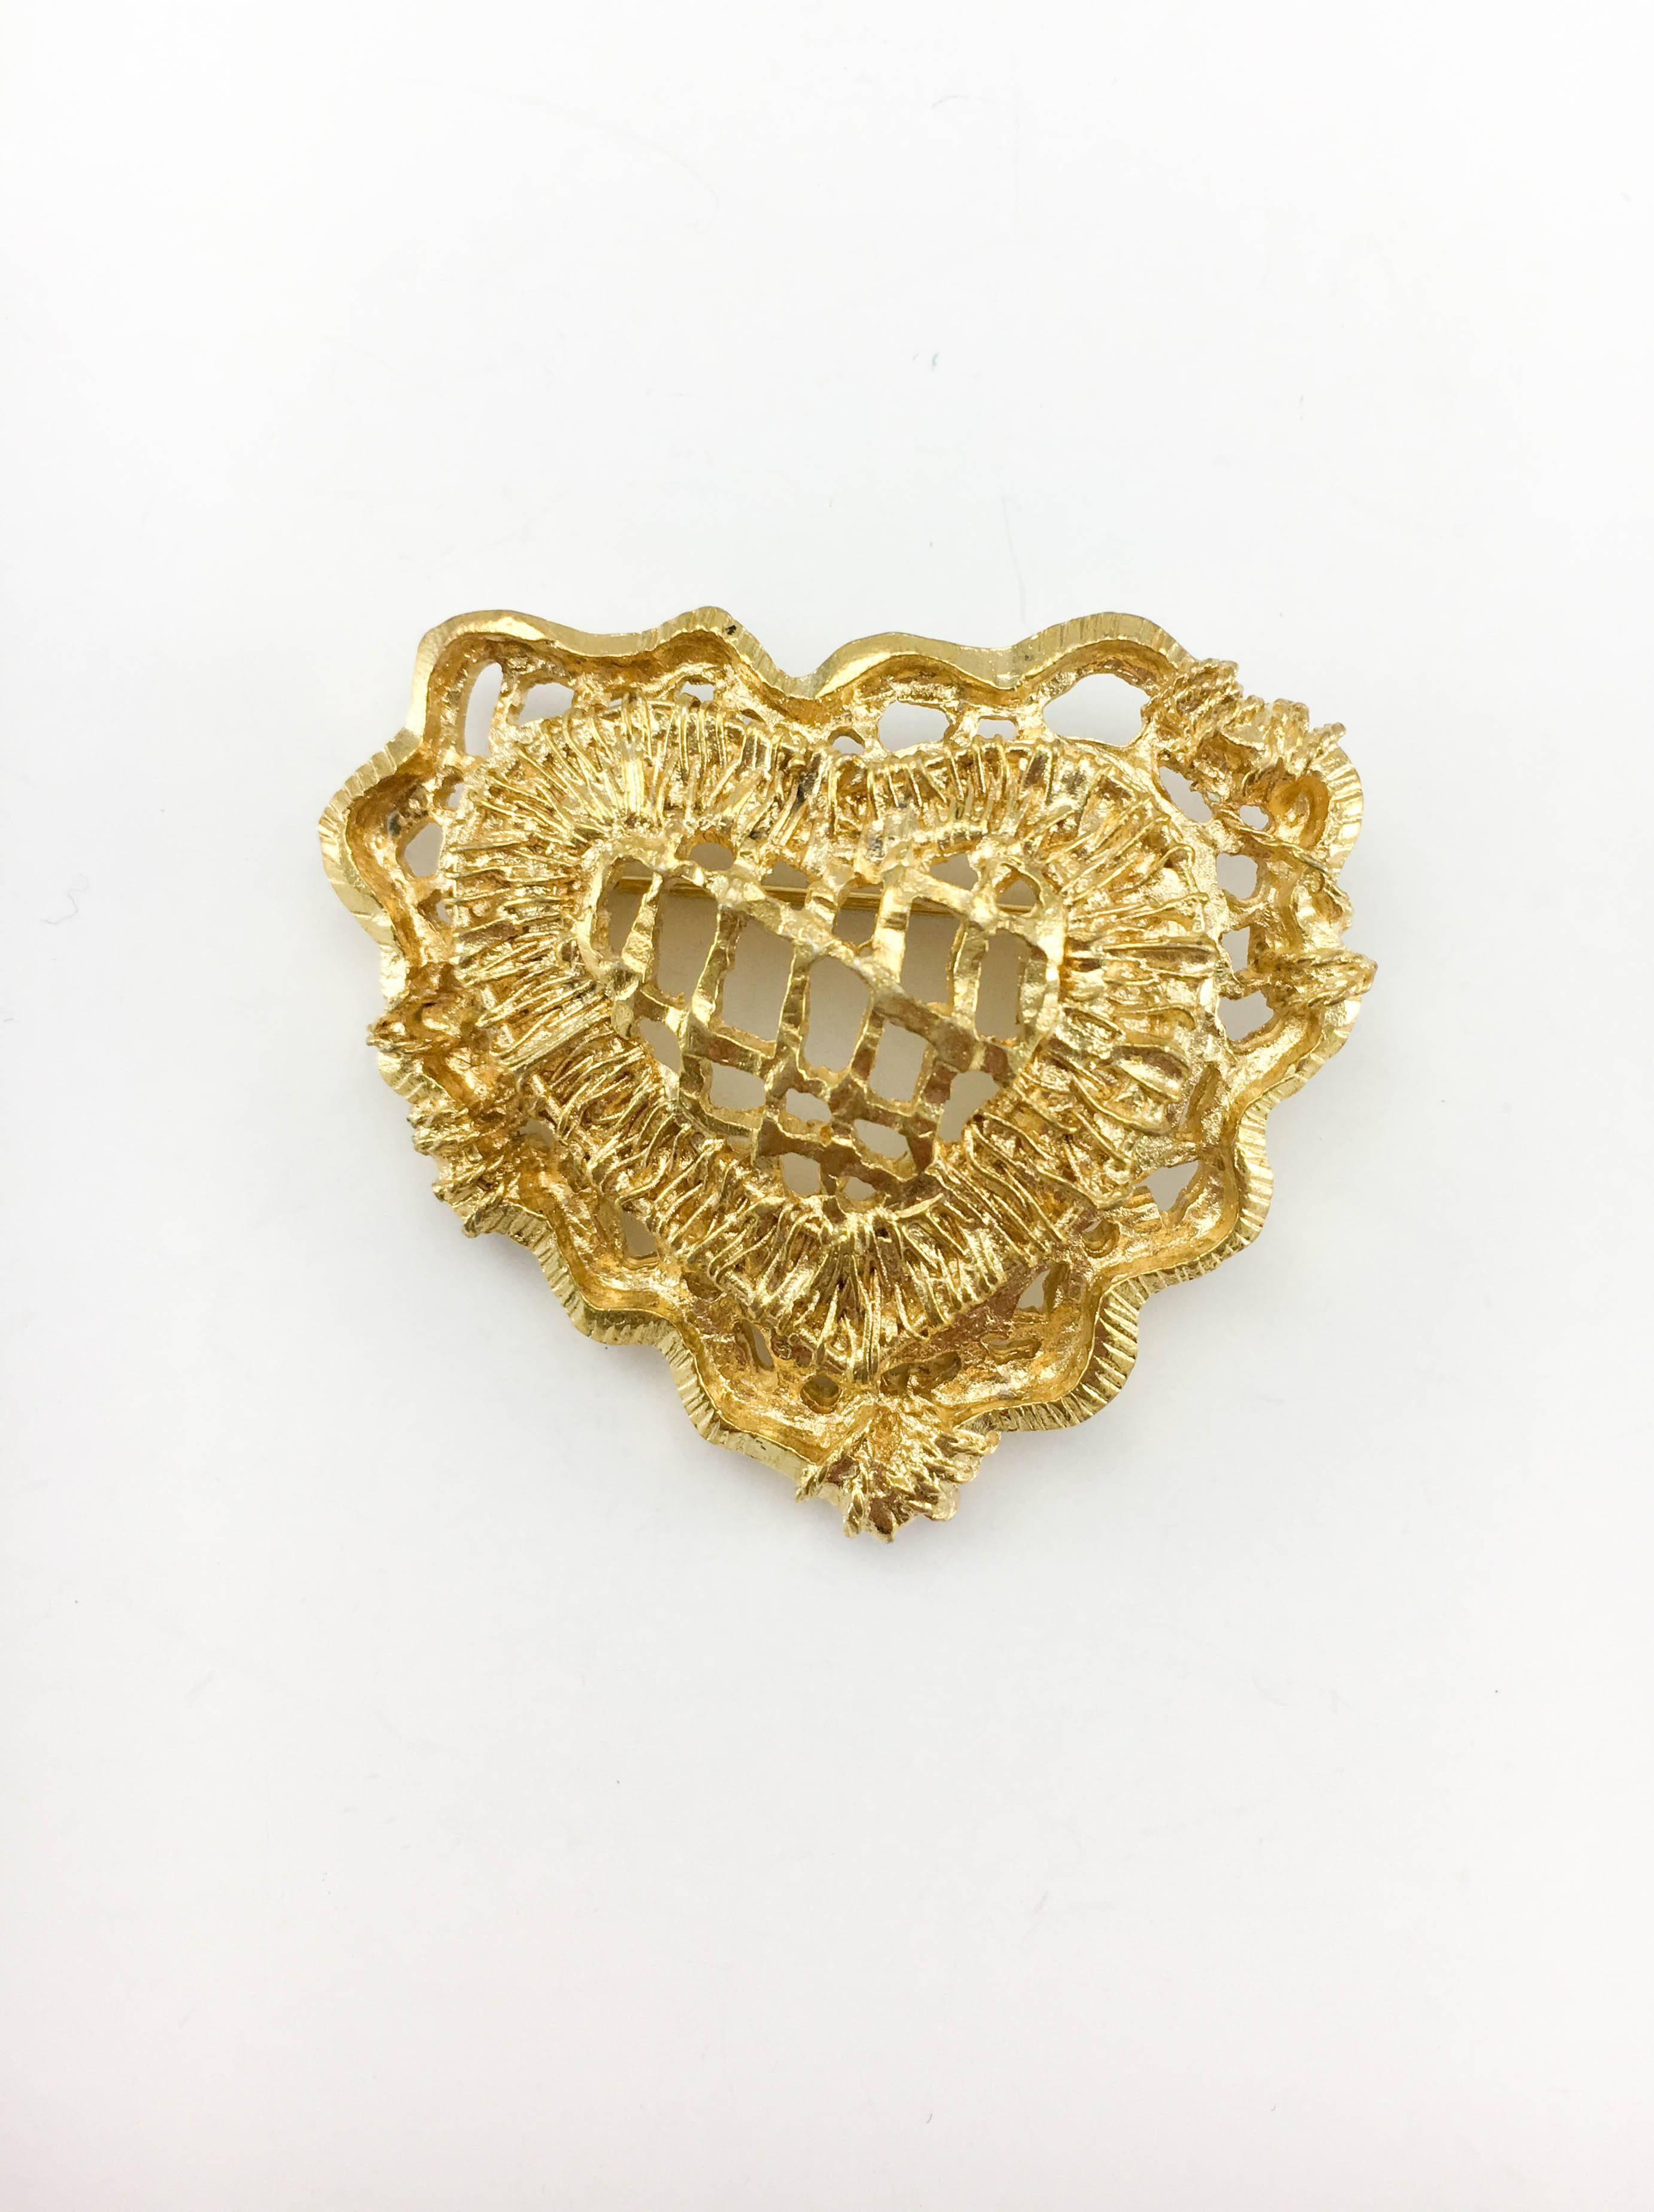 Vintage Christian Lacroix Gold-Plated Stylised Heart Brooch. This beautiful piece by Lacroix dates back from the 1990’s. Crafted in gold-plated metal, it features a cut-out design of a stylised heart. Christian Lacroix signed on the back. A gorgeous